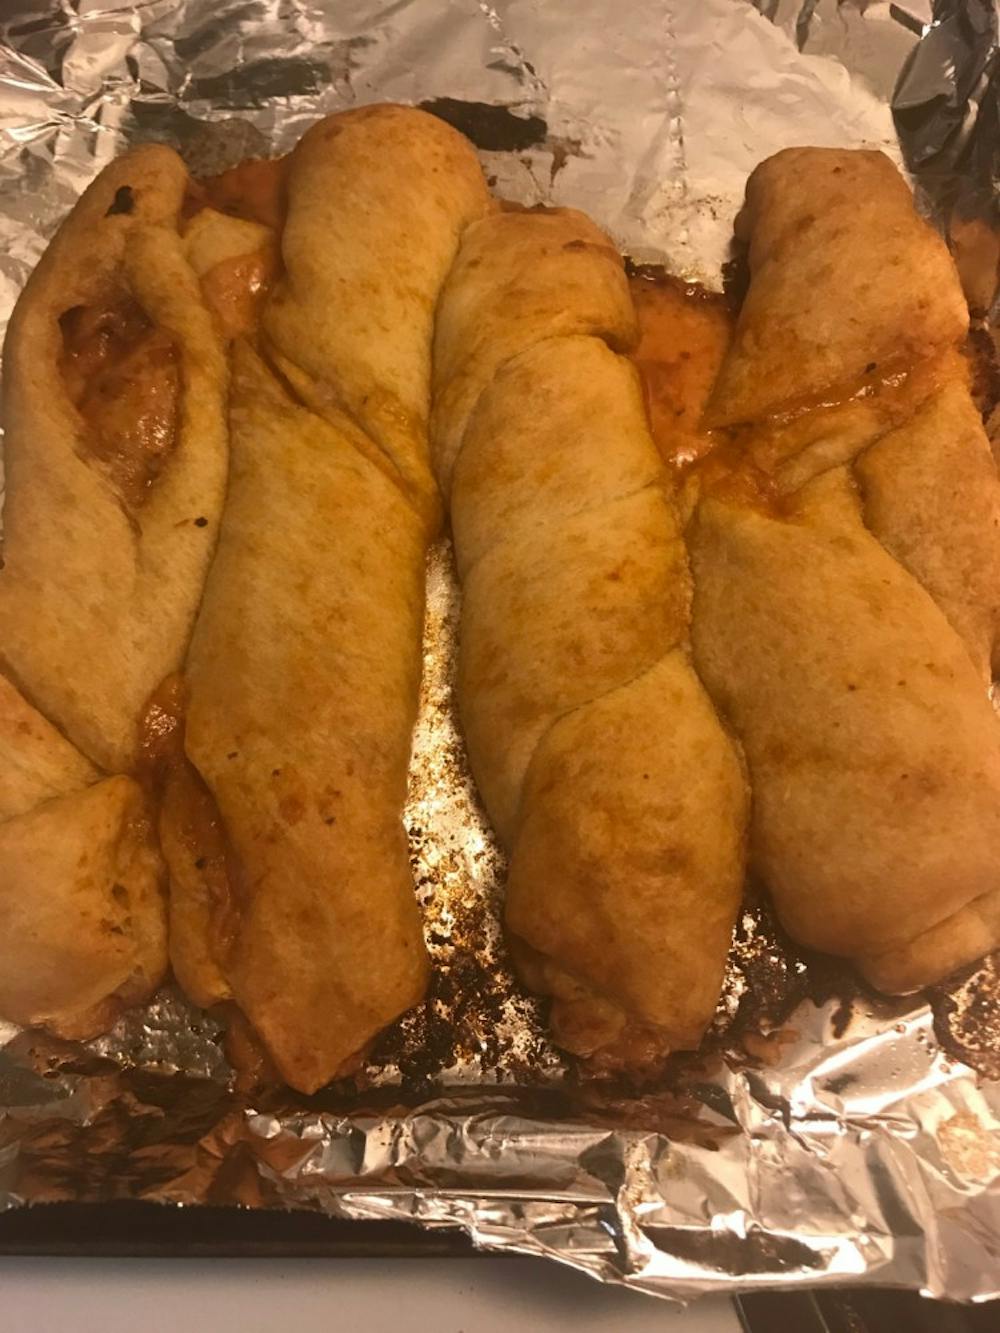 Recipe of the week: Pepperoni pizza twists